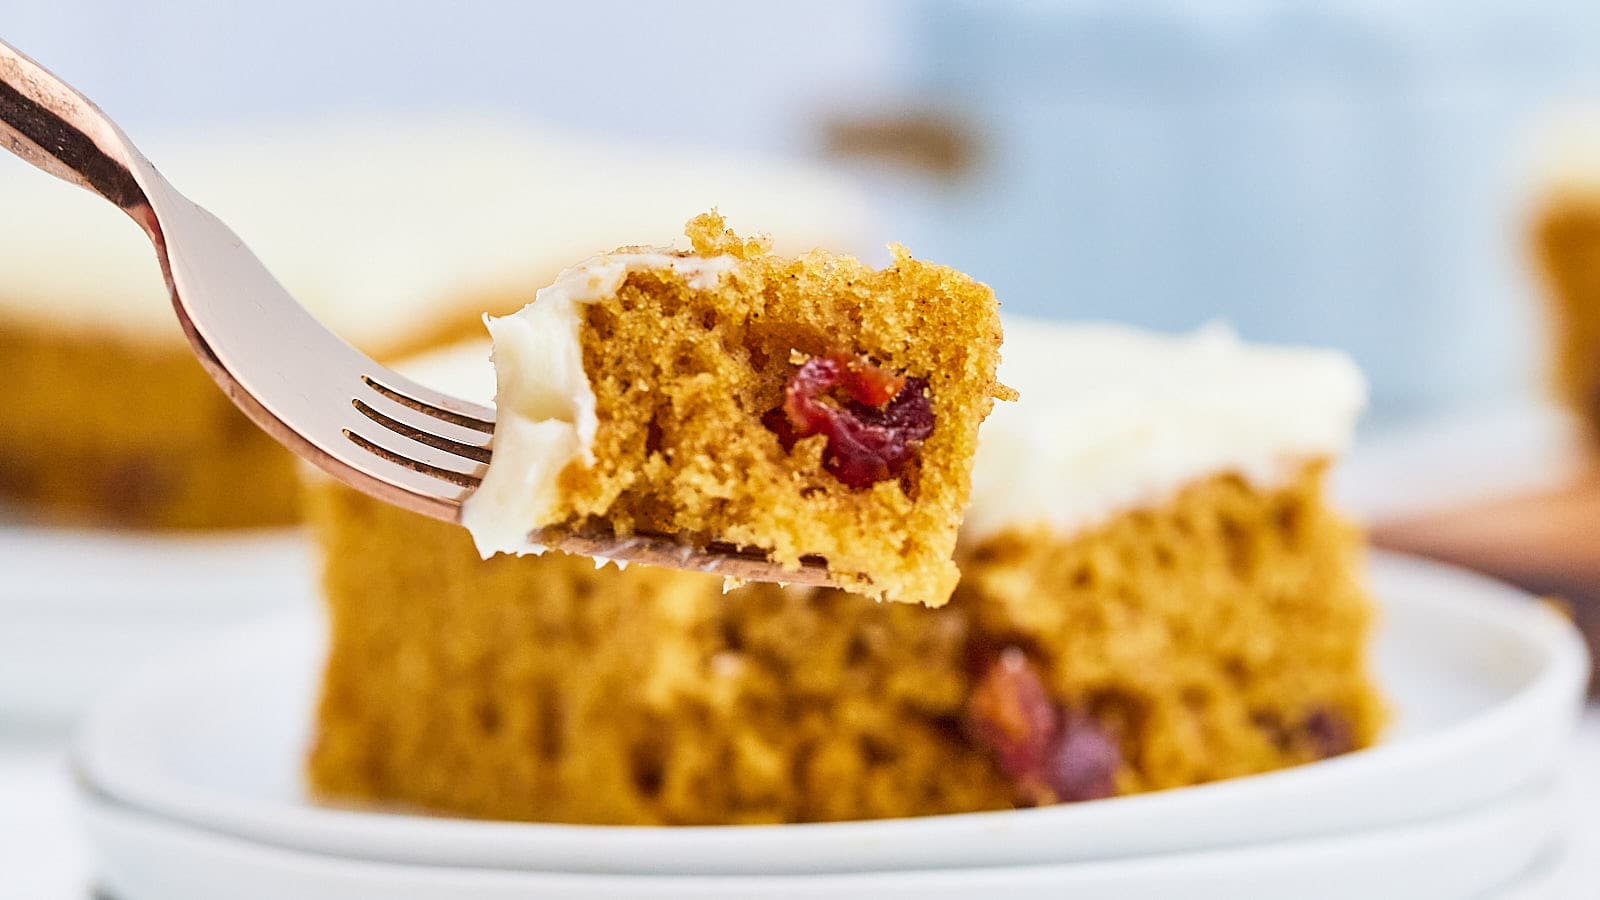 Pumpkin Bars With Cream Cheese Frosting by Cheerful Cook.